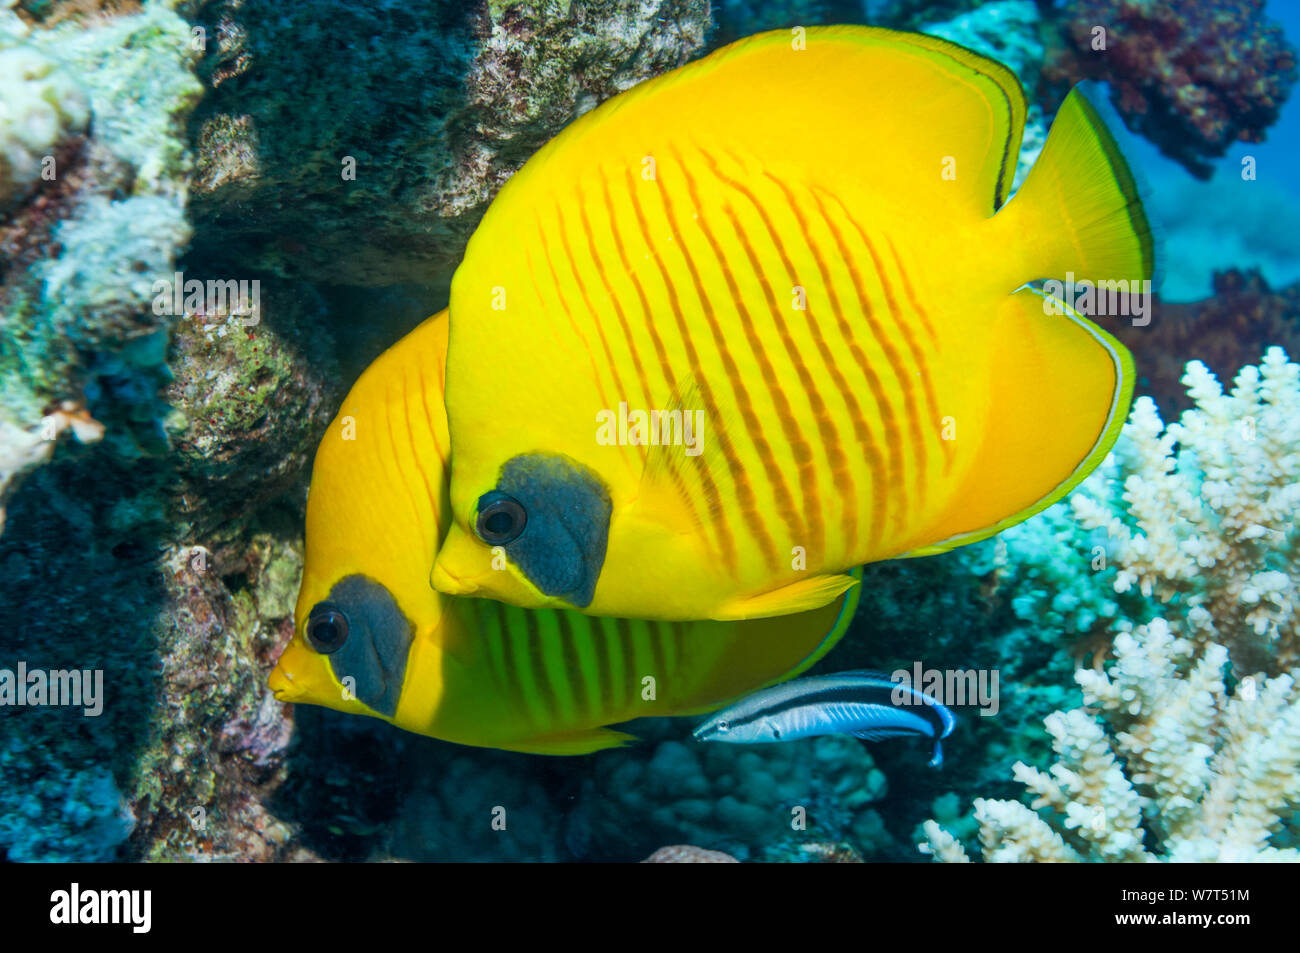 Golden butterflyfish (Chaetodon semilarvatus) with a Bluestreak cleaner wrasse (Labroides dimidiatus) this species is one of the few fish species to have longterm mates. Egypt, Red Sea. Stock Photo